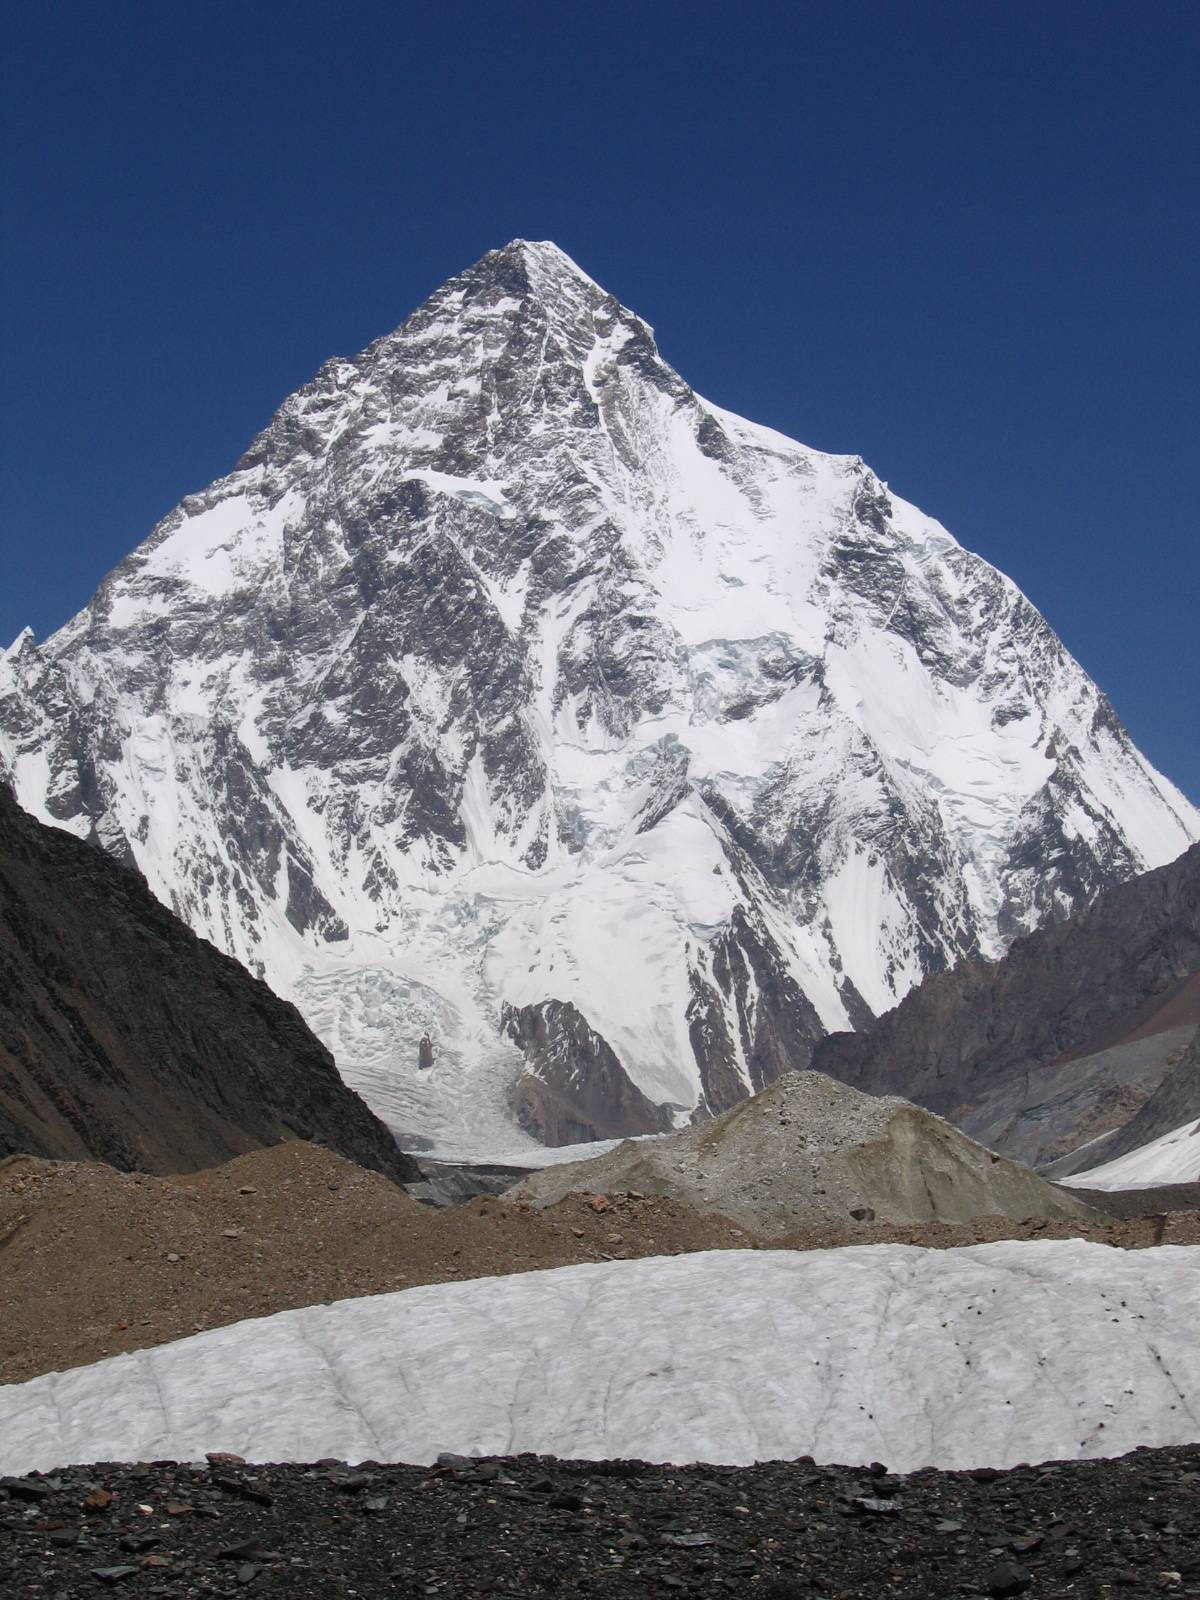 K2 In Pakistan Second Highest Mountain In The World | World Visits